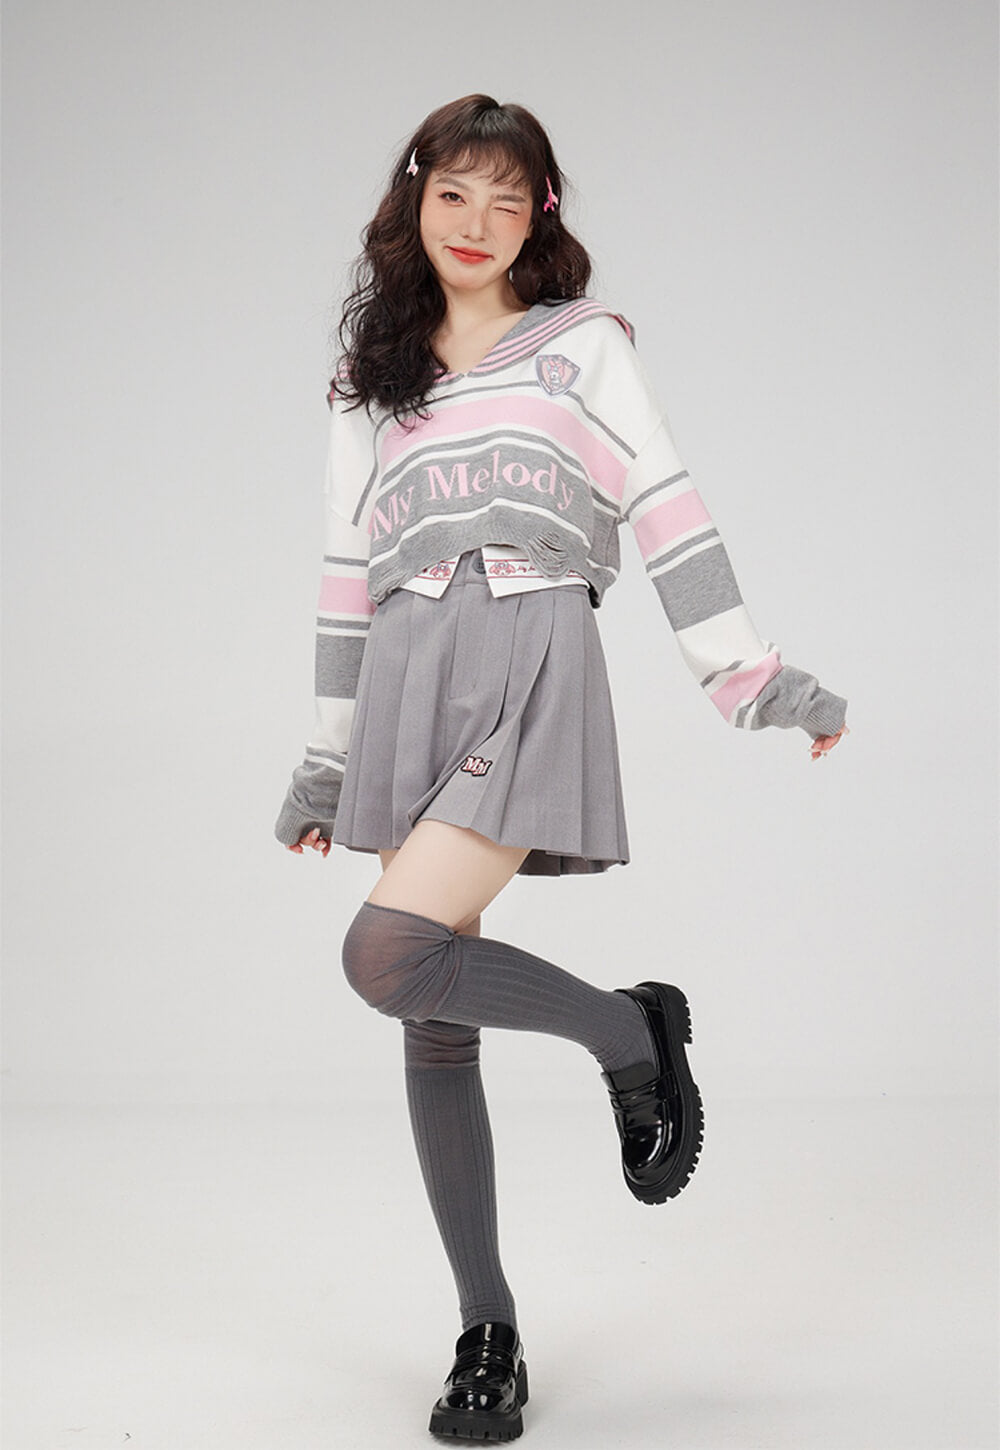 sanrio-authorized-my-melody-embroidery-jk-skirt-outfit